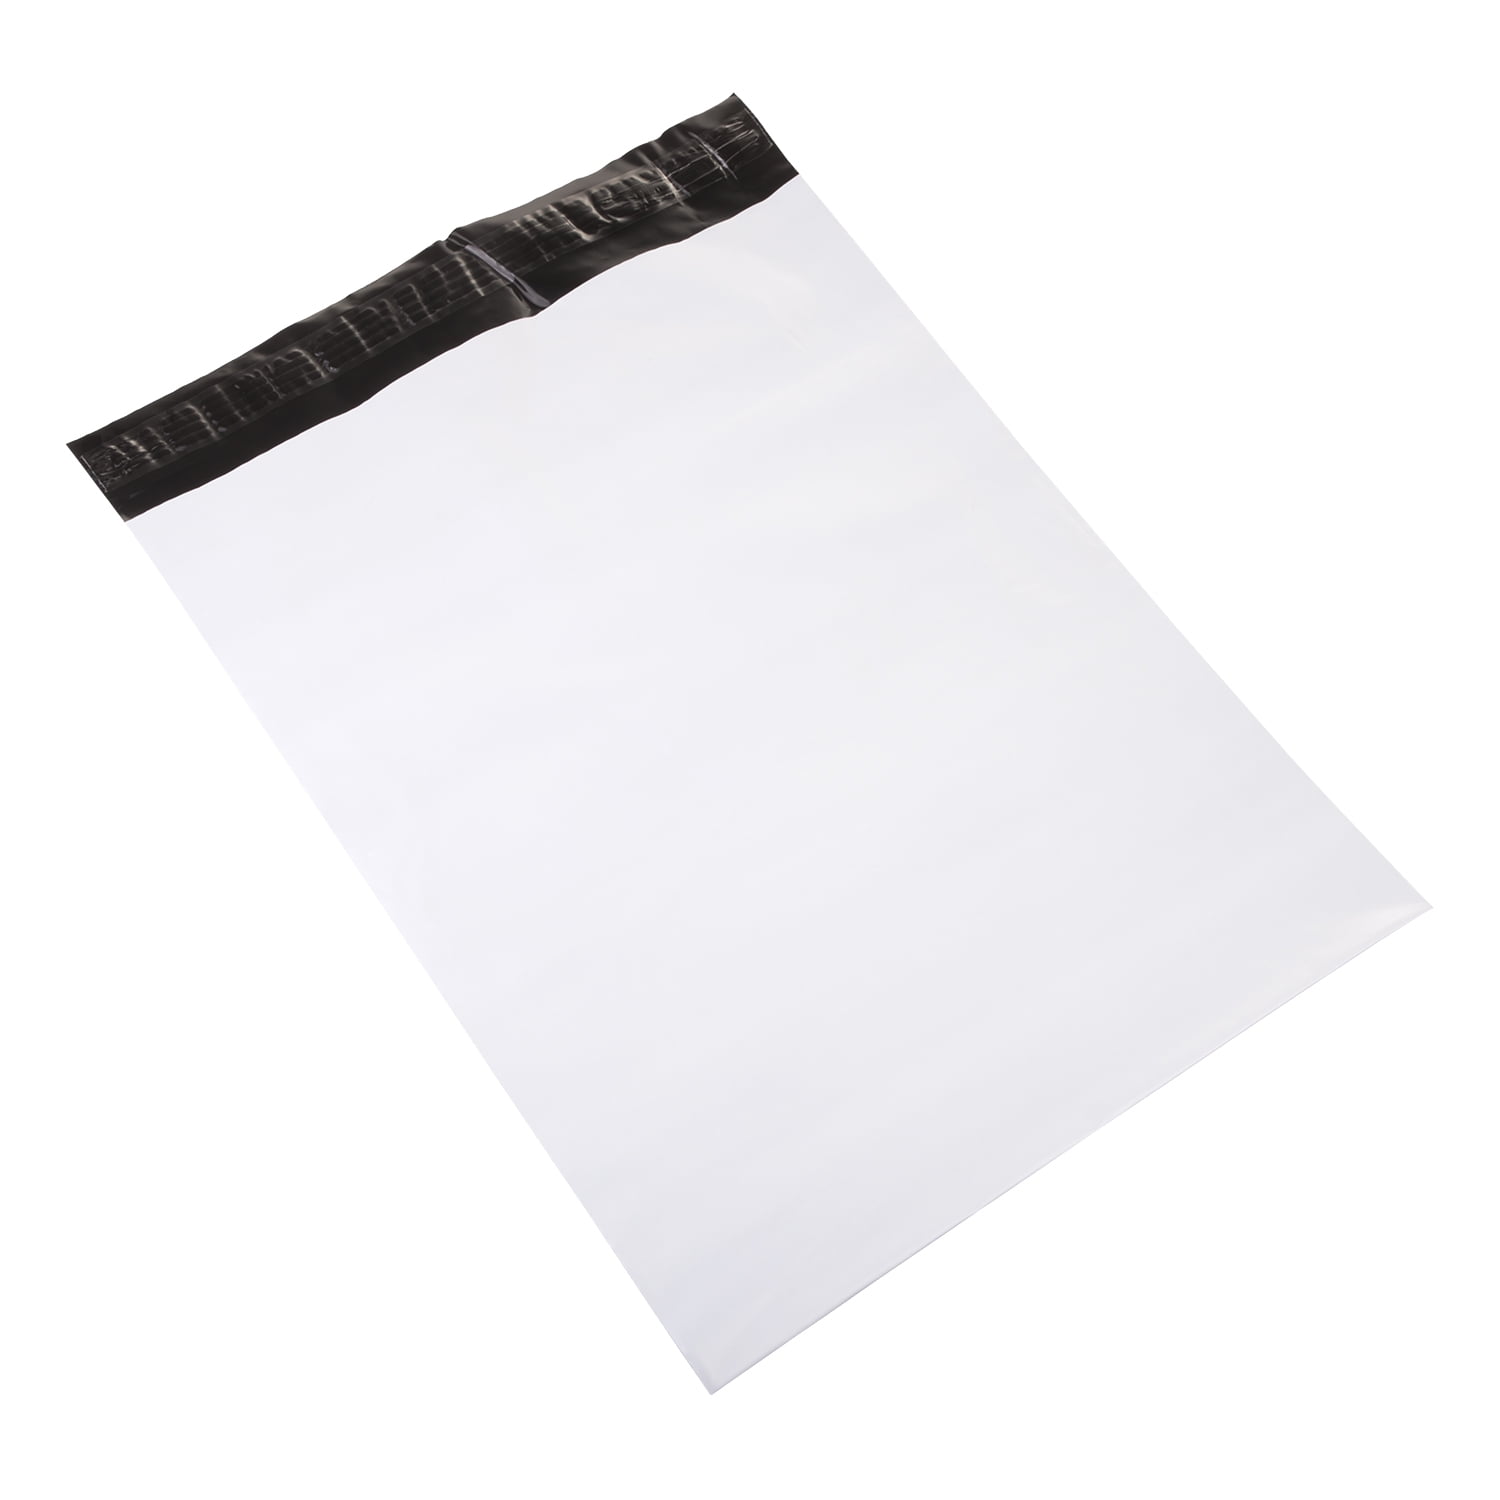 19 x 24 Inch ProLine Packaging Supplies White Poly Mailers Self-Sealing Shipping Envelopes Plastic Mailing Bags 2.5 Mil Thickness 19x24 50 